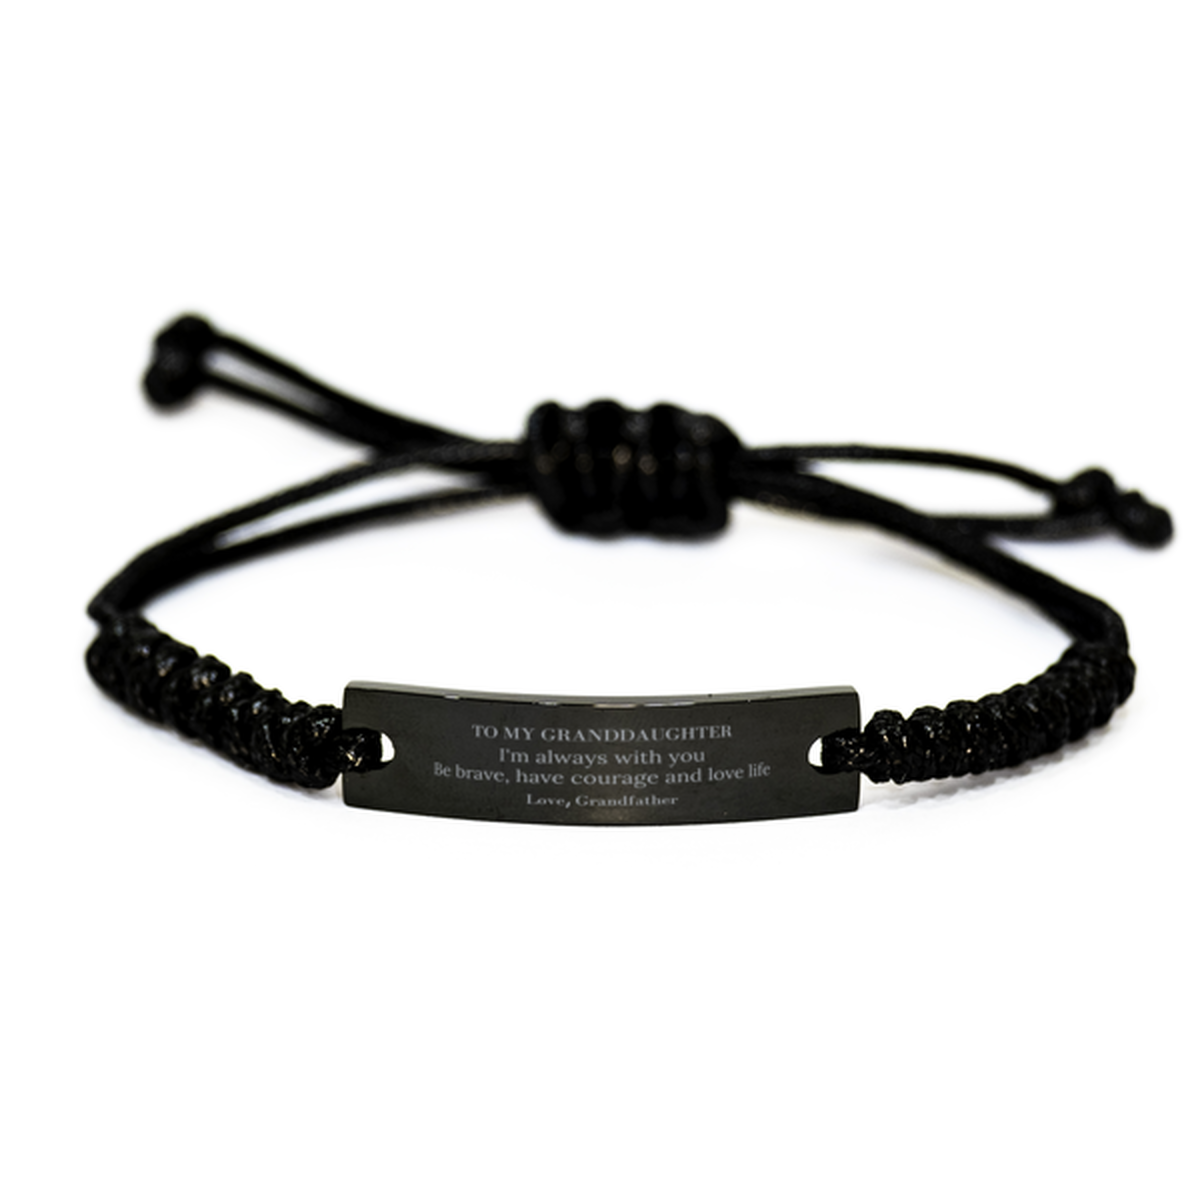 To My Granddaughter Gifts from Grandfather, Unique Black Rope Bracelet Inspirational Christmas Birthday Graduation Gifts for Granddaughter I'm always with you. Be brave, have courage and love life. Love, Grandfather